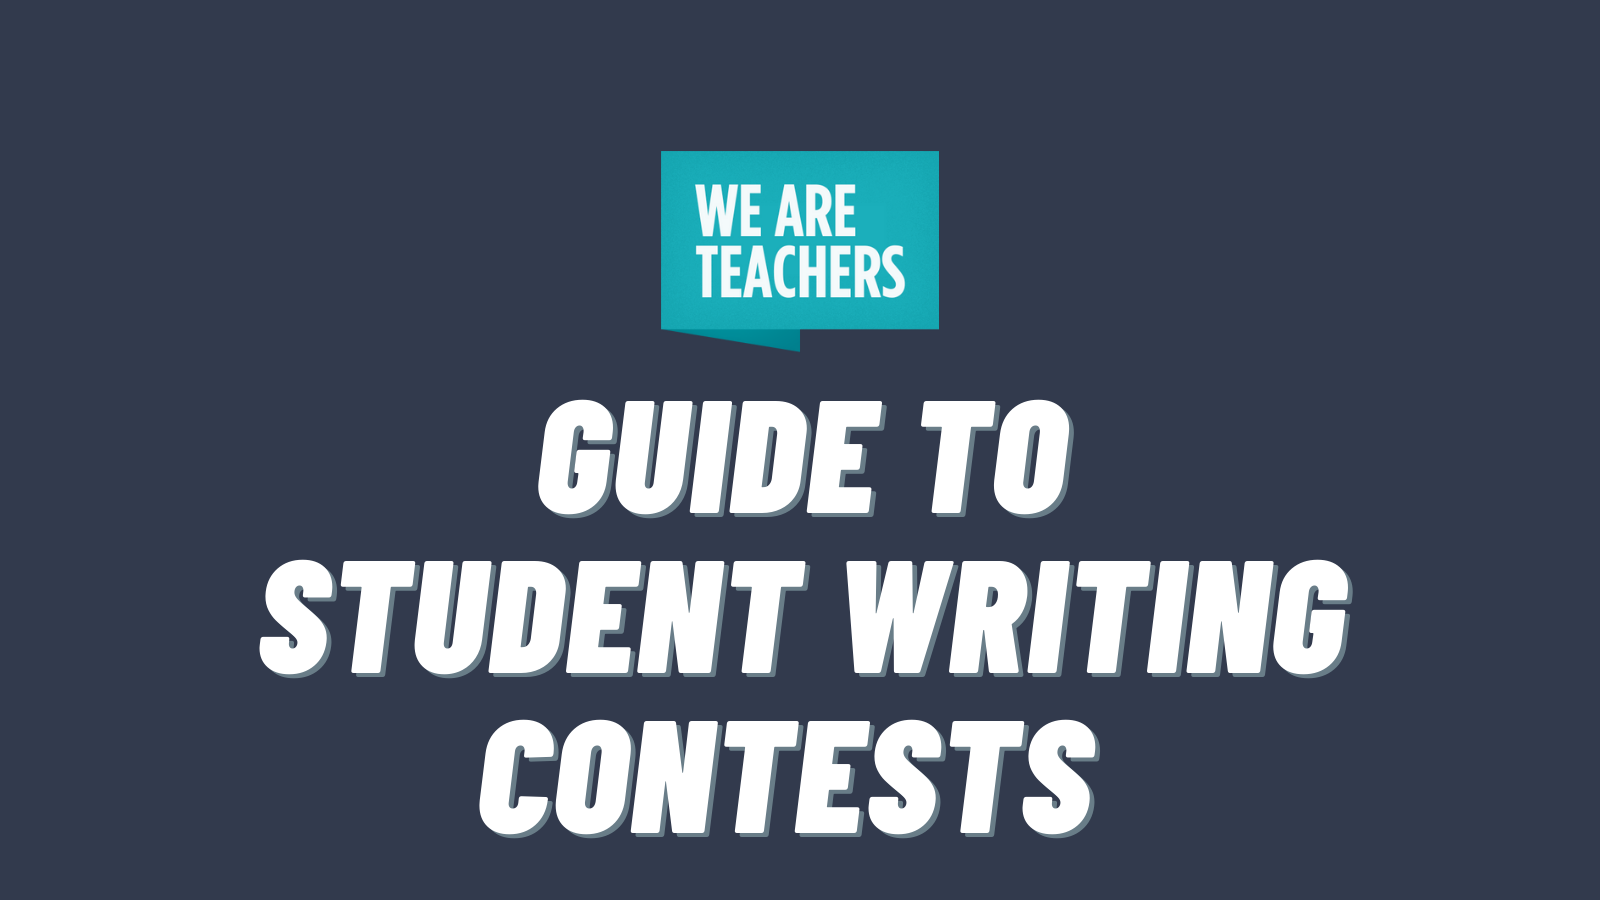 We Are Teachers logo and text that says Guide to Student Writing Contests on dark background